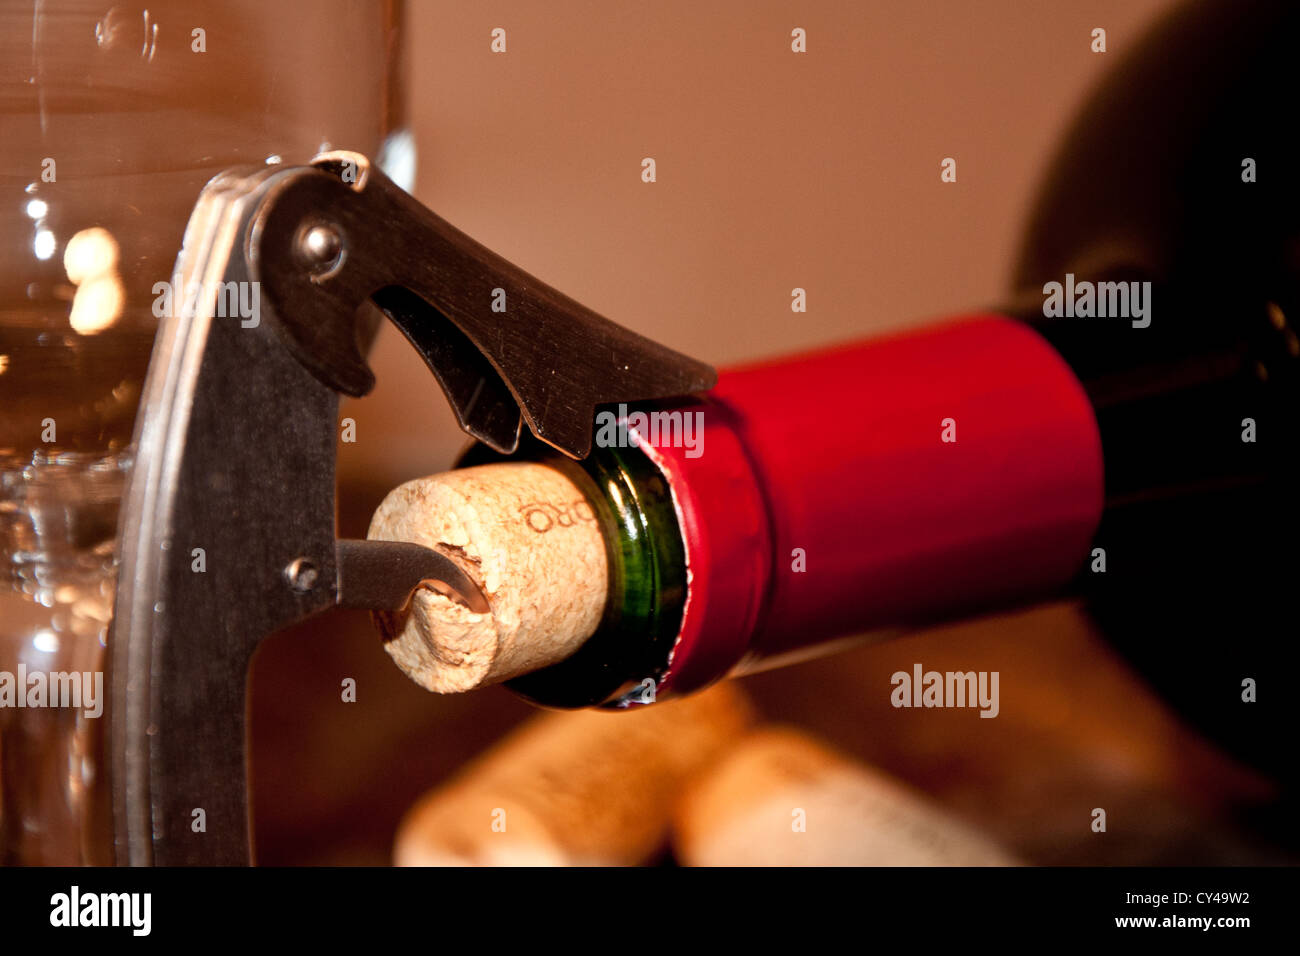 Opening a Bottle of Wine Stock Photo